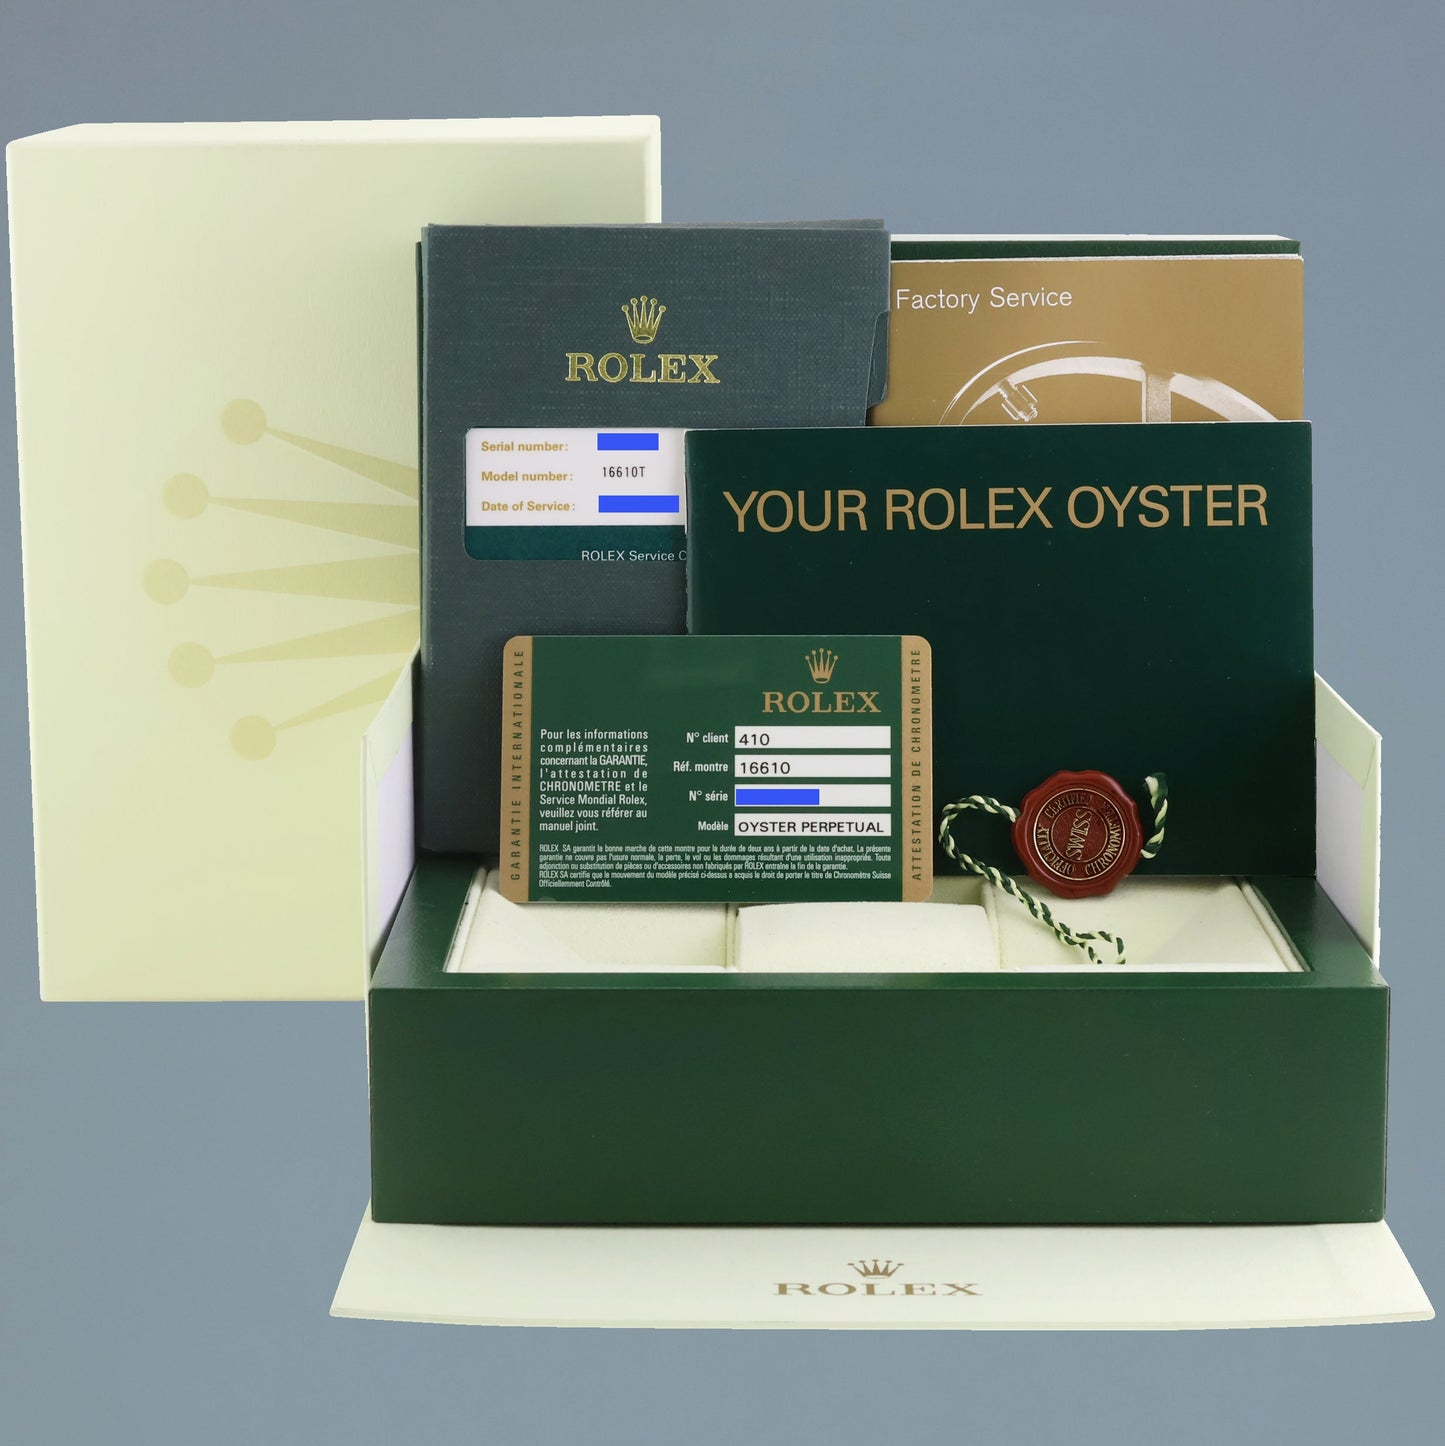 2019 RSC PAPERS 2009 MINT Rolex Submariner Date 16610 Steel Black Watch Box